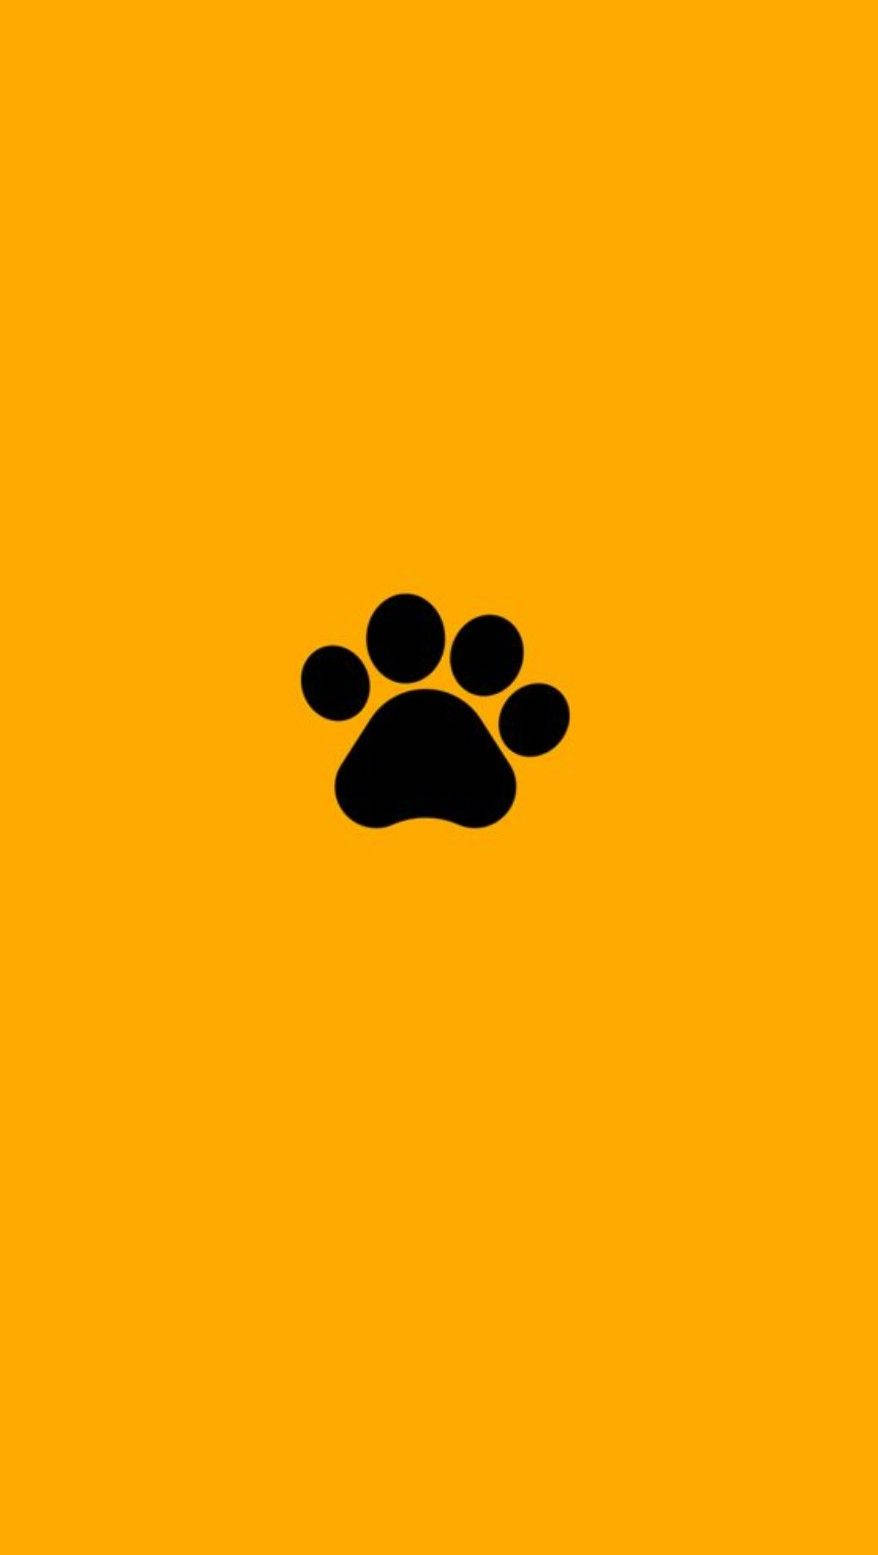 Black Paw On Cute Pastel Yellow Aesthetic Background